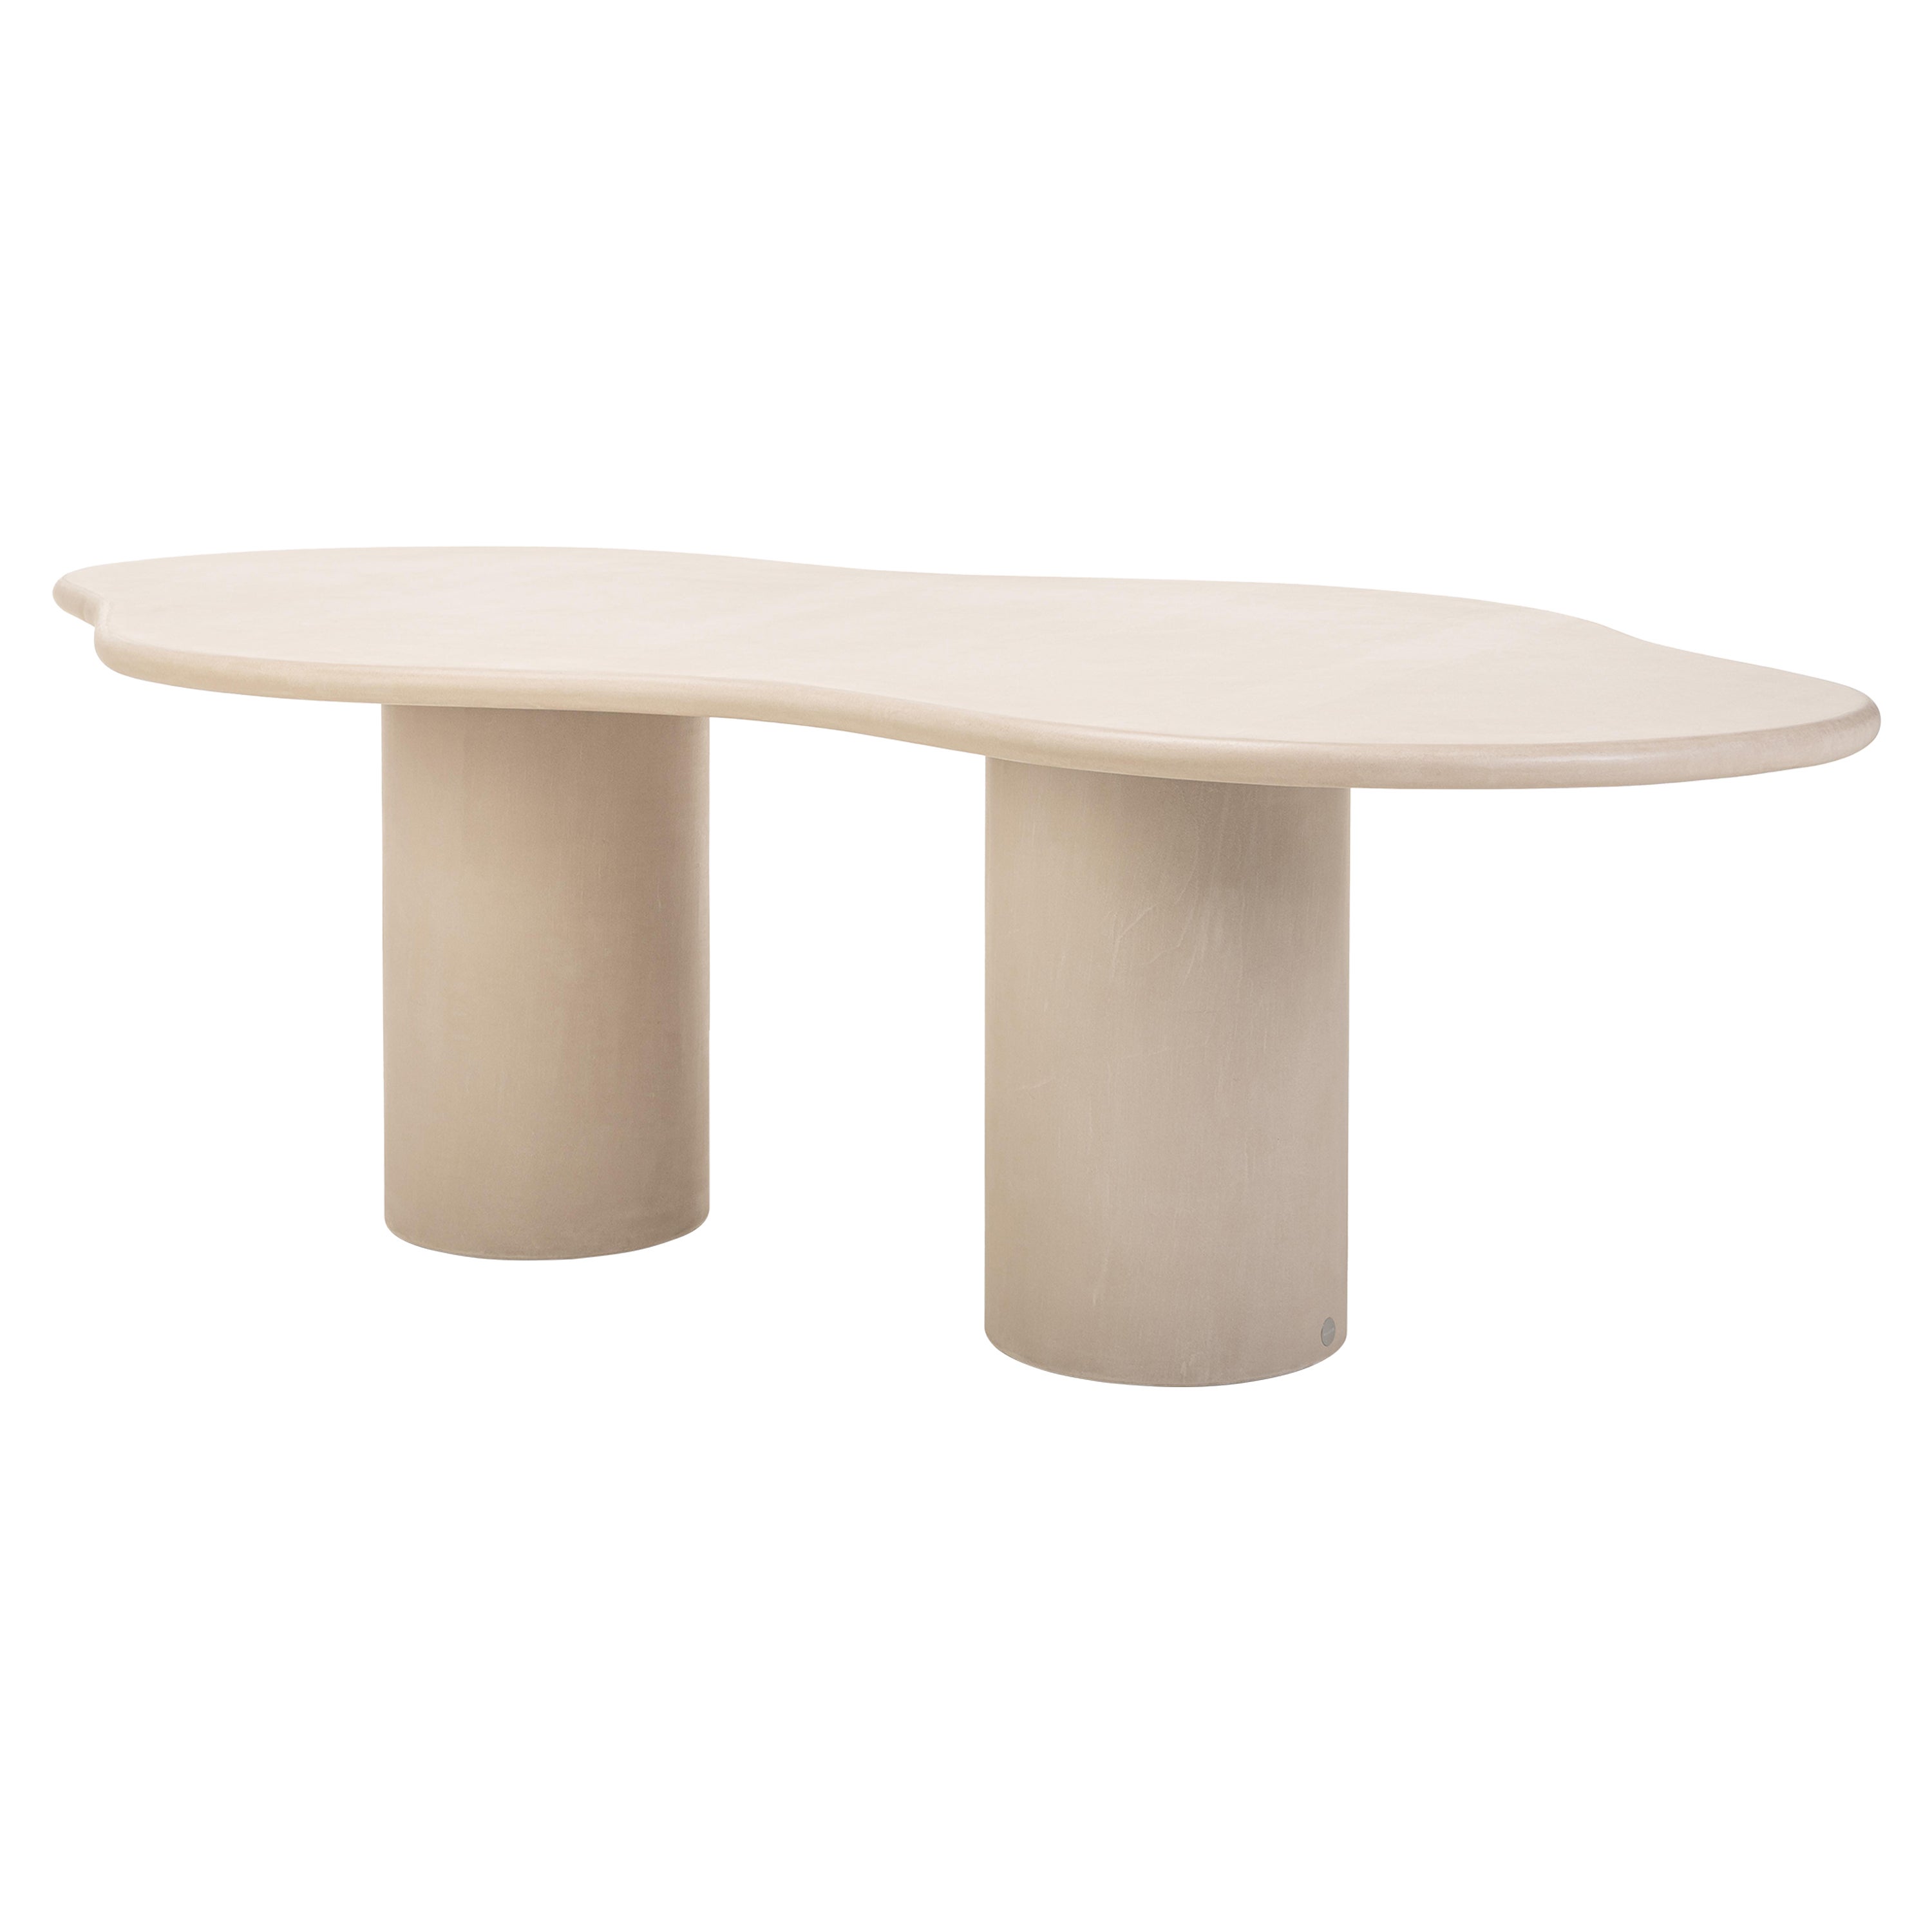 Contemporary Organic Natural Plaster "Fluent" Table 260cm by Isabelle Beaumont